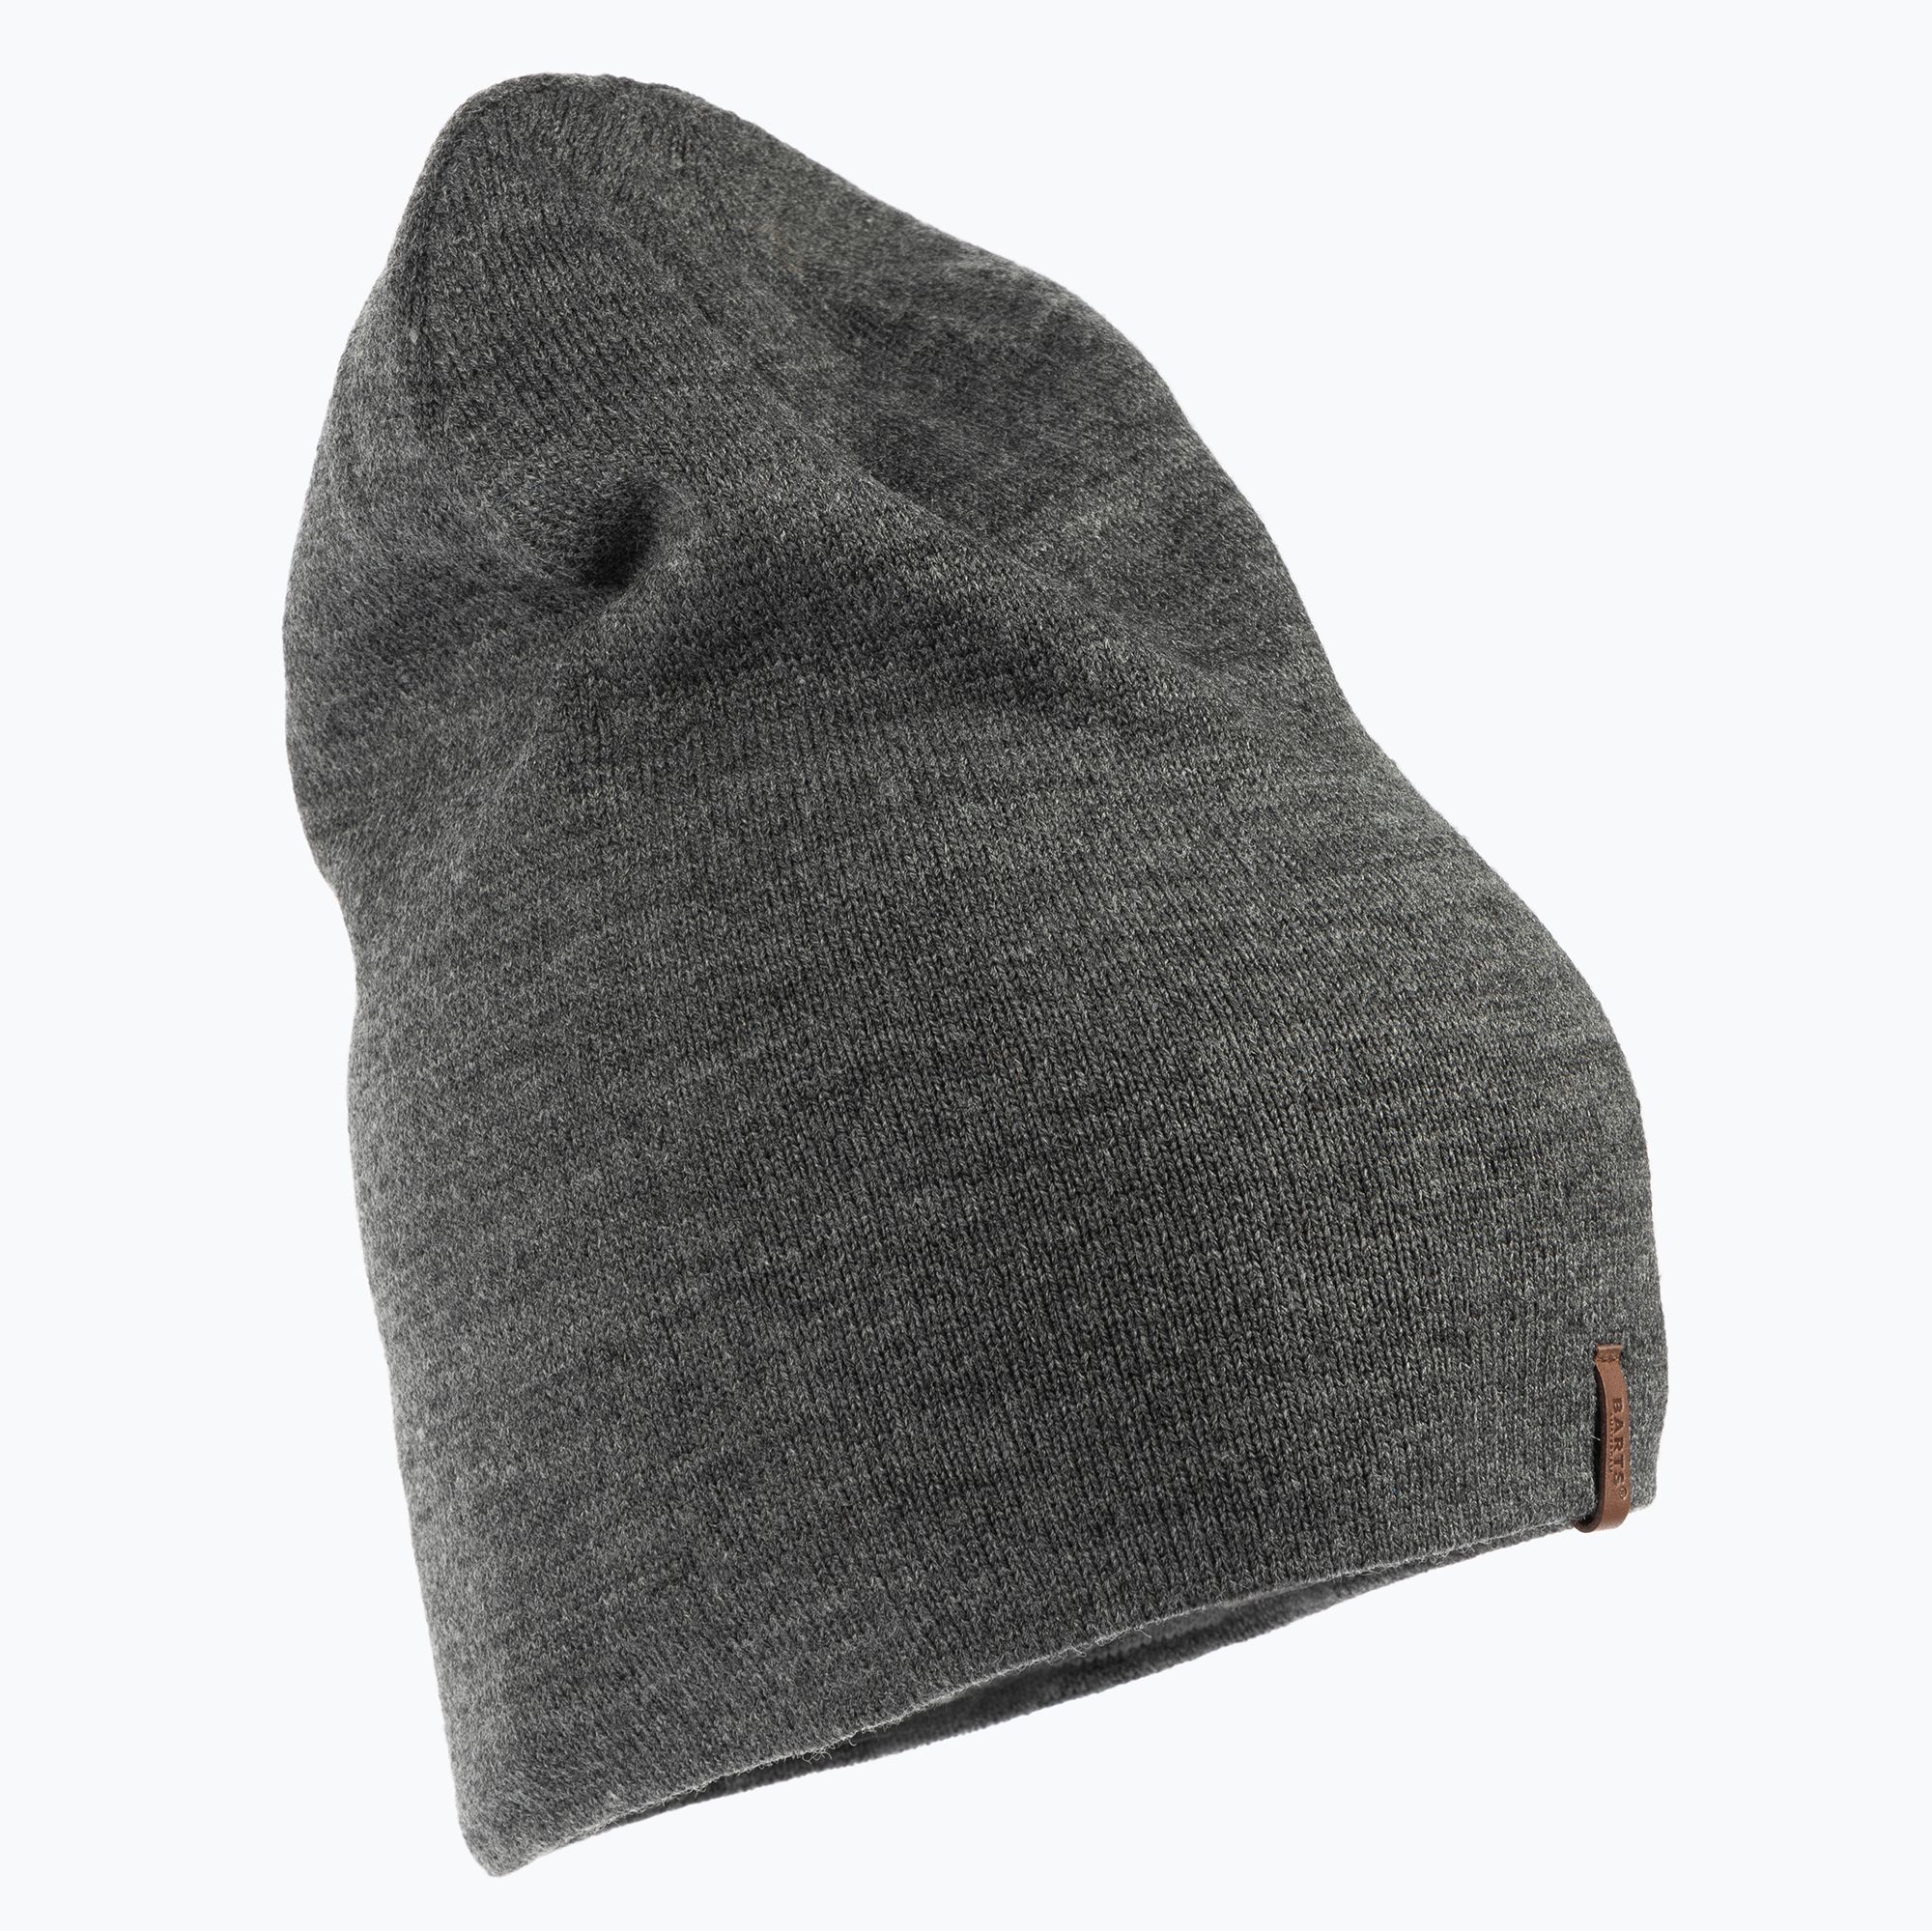 BARTS Eclipse Beanie black - Order now at BARTS